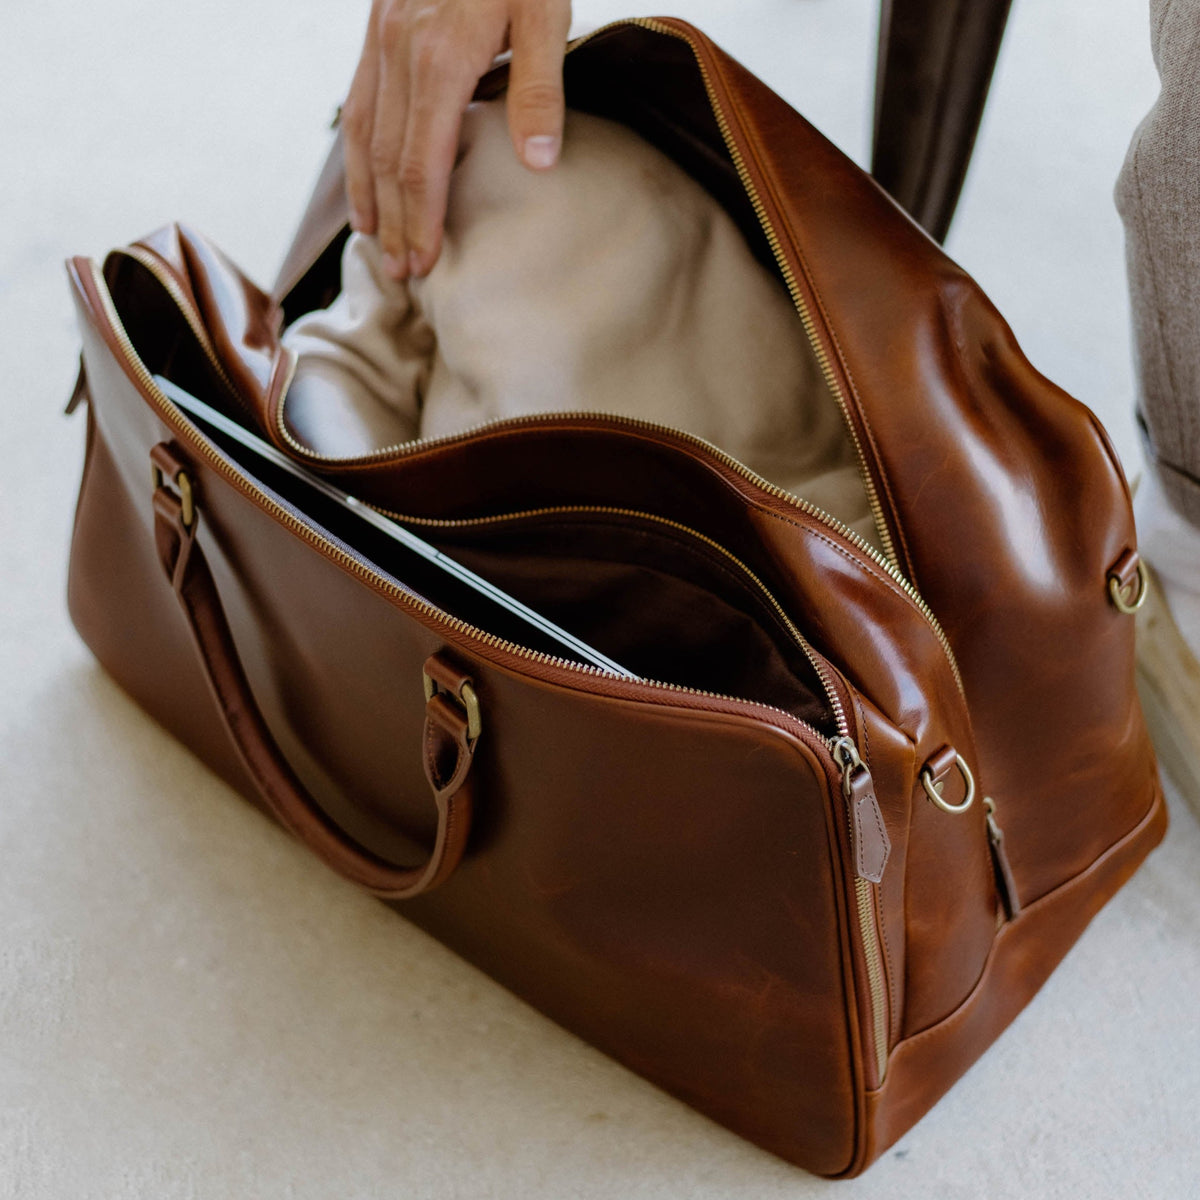 Voyage Messenger Bag - Luxury Leather Bags Selection - Bags